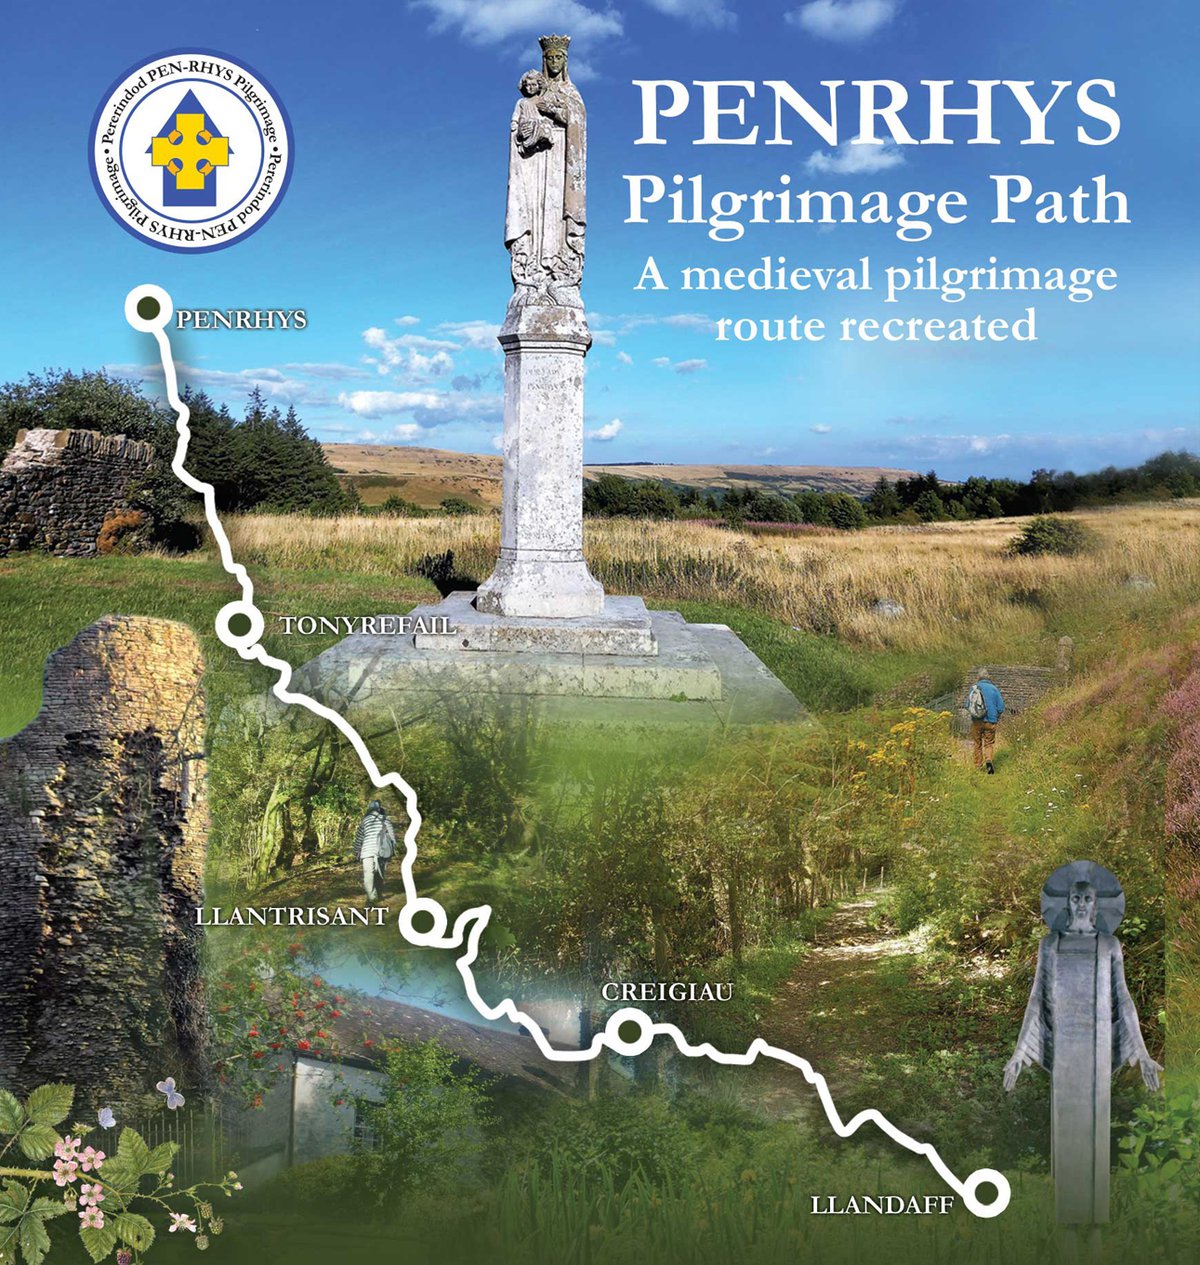 Penrhys pilgrimage path: a medieval pilgrimage route recreated